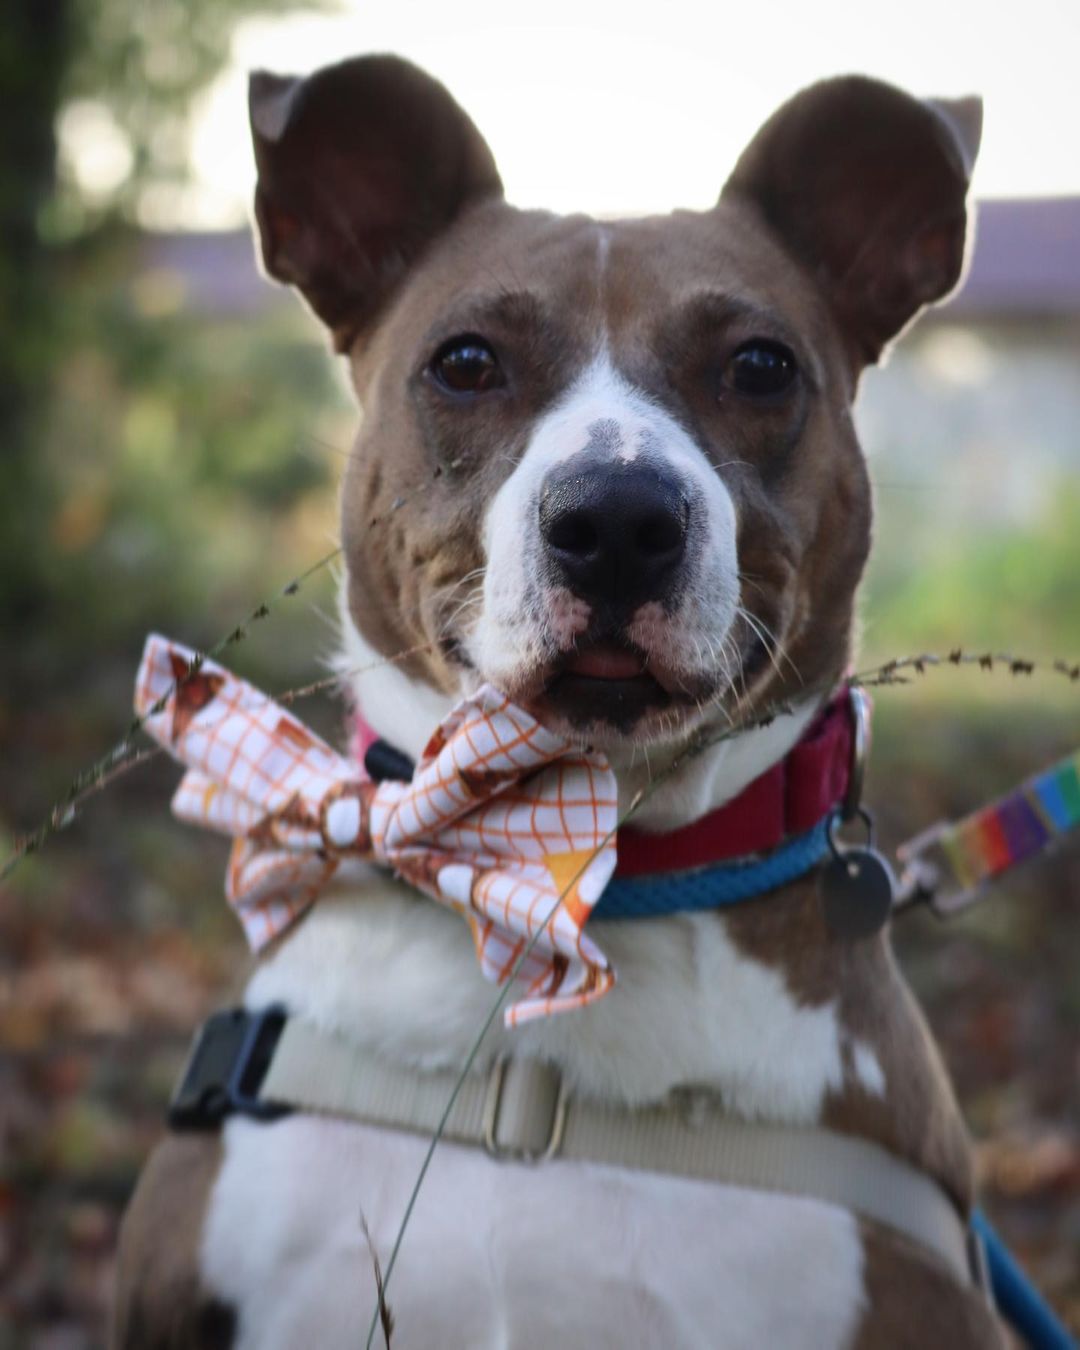 Girlie’s been with Pet Helpers for 208 days, but this week, we’d love to give her something to be thankful for 🦃🥰

This sweet 3 year old pup, along with all shelter pets aged 1 year and older, will be available for a fraction of the regular adoption fee this Saturday from 12-6 for our “Home for the Holidays” Adoption Event and Pet Supply Sale. 

We will be pulling out adoption specials as high as 40% off from Santa Paws’ hat, selling brand new collars, leashes, and harnesses, as well as hosting a silent auction to help provide for the costs of sheltering longterm pets like Girlie 🎅

Meet more adoptables at pethelpers.org and be sure to mark your calendars for our Home for the Holidays Adoption Event and Sale this coming Saturday from 12-6 🐾

.
.
.
.
.
.
<a target='_blank' href='https://www.instagram.com/explore/tags/petphotography/'>#petphotography</a> <a target='_blank' href='https://www.instagram.com/explore/tags/dogportrait/'>#dogportrait</a> <a target='_blank' href='https://www.instagram.com/explore/tags/dogportraits/'>#dogportraits</a> <a target='_blank' href='https://www.instagram.com/explore/tags/petportrait/'>#petportrait</a> <a target='_blank' href='https://www.instagram.com/explore/tags/petsofinstagram/'>#petsofinstagram</a> <a target='_blank' href='https://www.instagram.com/explore/tags/dogsofinstagram/'>#dogsofinstagram</a> <a target='_blank' href='https://www.instagram.com/explore/tags/charleston/'>#charleston</a> <a target='_blank' href='https://www.instagram.com/explore/tags/lowcountry/'>#lowcountry</a> <a target='_blank' href='https://www.instagram.com/explore/tags/lowcountryliving/'>#lowcountryliving</a> <a target='_blank' href='https://www.instagram.com/explore/tags/fall/'>#fall</a> <a target='_blank' href='https://www.instagram.com/explore/tags/thanksgiving/'>#thanksgiving</a> <a target='_blank' href='https://www.instagram.com/explore/tags/thanksgiving2021/'>#thanksgiving2021</a> <a target='_blank' href='https://www.instagram.com/explore/tags/smallbusinesssaturday/'>#smallbusinesssaturday</a> <a target='_blank' href='https://www.instagram.com/explore/tags/blackfriday/'>#blackfriday</a> <a target='_blank' href='https://www.instagram.com/explore/tags/shelter/'>#shelter</a> <a target='_blank' href='https://www.instagram.com/explore/tags/shelterdog/'>#shelterdog</a> <a target='_blank' href='https://www.instagram.com/explore/tags/thankful/'>#thankful</a> <a target='_blank' href='https://www.instagram.com/explore/tags/rescue/'>#rescue</a> <a target='_blank' href='https://www.instagram.com/explore/tags/rescuedog/'>#rescuedog</a> <a target='_blank' href='https://www.instagram.com/explore/tags/shelterdogsofinstagram/'>#shelterdogsofinstagram</a> <a target='_blank' href='https://www.instagram.com/explore/tags/rescuedismyfavoritebreed/'>#rescuedismyfavoritebreed</a> <a target='_blank' href='https://www.instagram.com/explore/tags/rescuedogsofinstagram/'>#rescuedogsofinstagram</a> <a target='_blank' href='https://www.instagram.com/explore/tags/adopt/'>#adopt</a> <a target='_blank' href='https://www.instagram.com/explore/tags/adoptme/'>#adoptme</a> <a target='_blank' href='https://www.instagram.com/explore/tags/adoptdontshop/'>#adoptdontshop</a> <a target='_blank' href='https://www.instagram.com/explore/tags/muttsofinstagram/'>#muttsofinstagram</a> <a target='_blank' href='https://www.instagram.com/explore/tags/mutt/'>#mutt</a> <a target='_blank' href='https://www.instagram.com/explore/tags/girlie/'>#girlie</a> <a target='_blank' href='https://www.instagram.com/explore/tags/southcarolina/'>#southcarolina</a> <a target='_blank' href='https://www.instagram.com/explore/tags/sc/'>#sc</a>